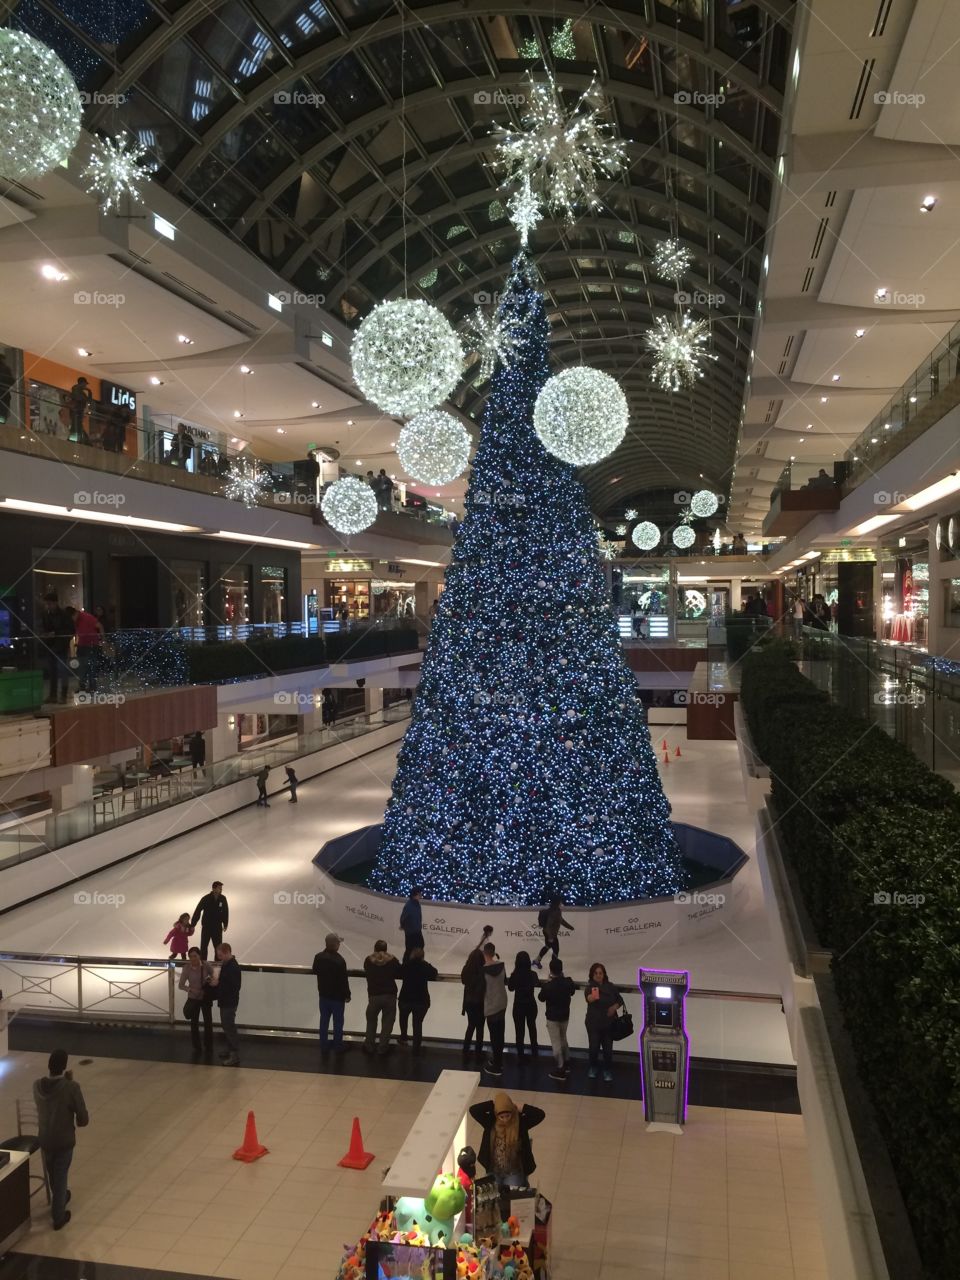 Inside The Galleria in Houston during Christmas. 